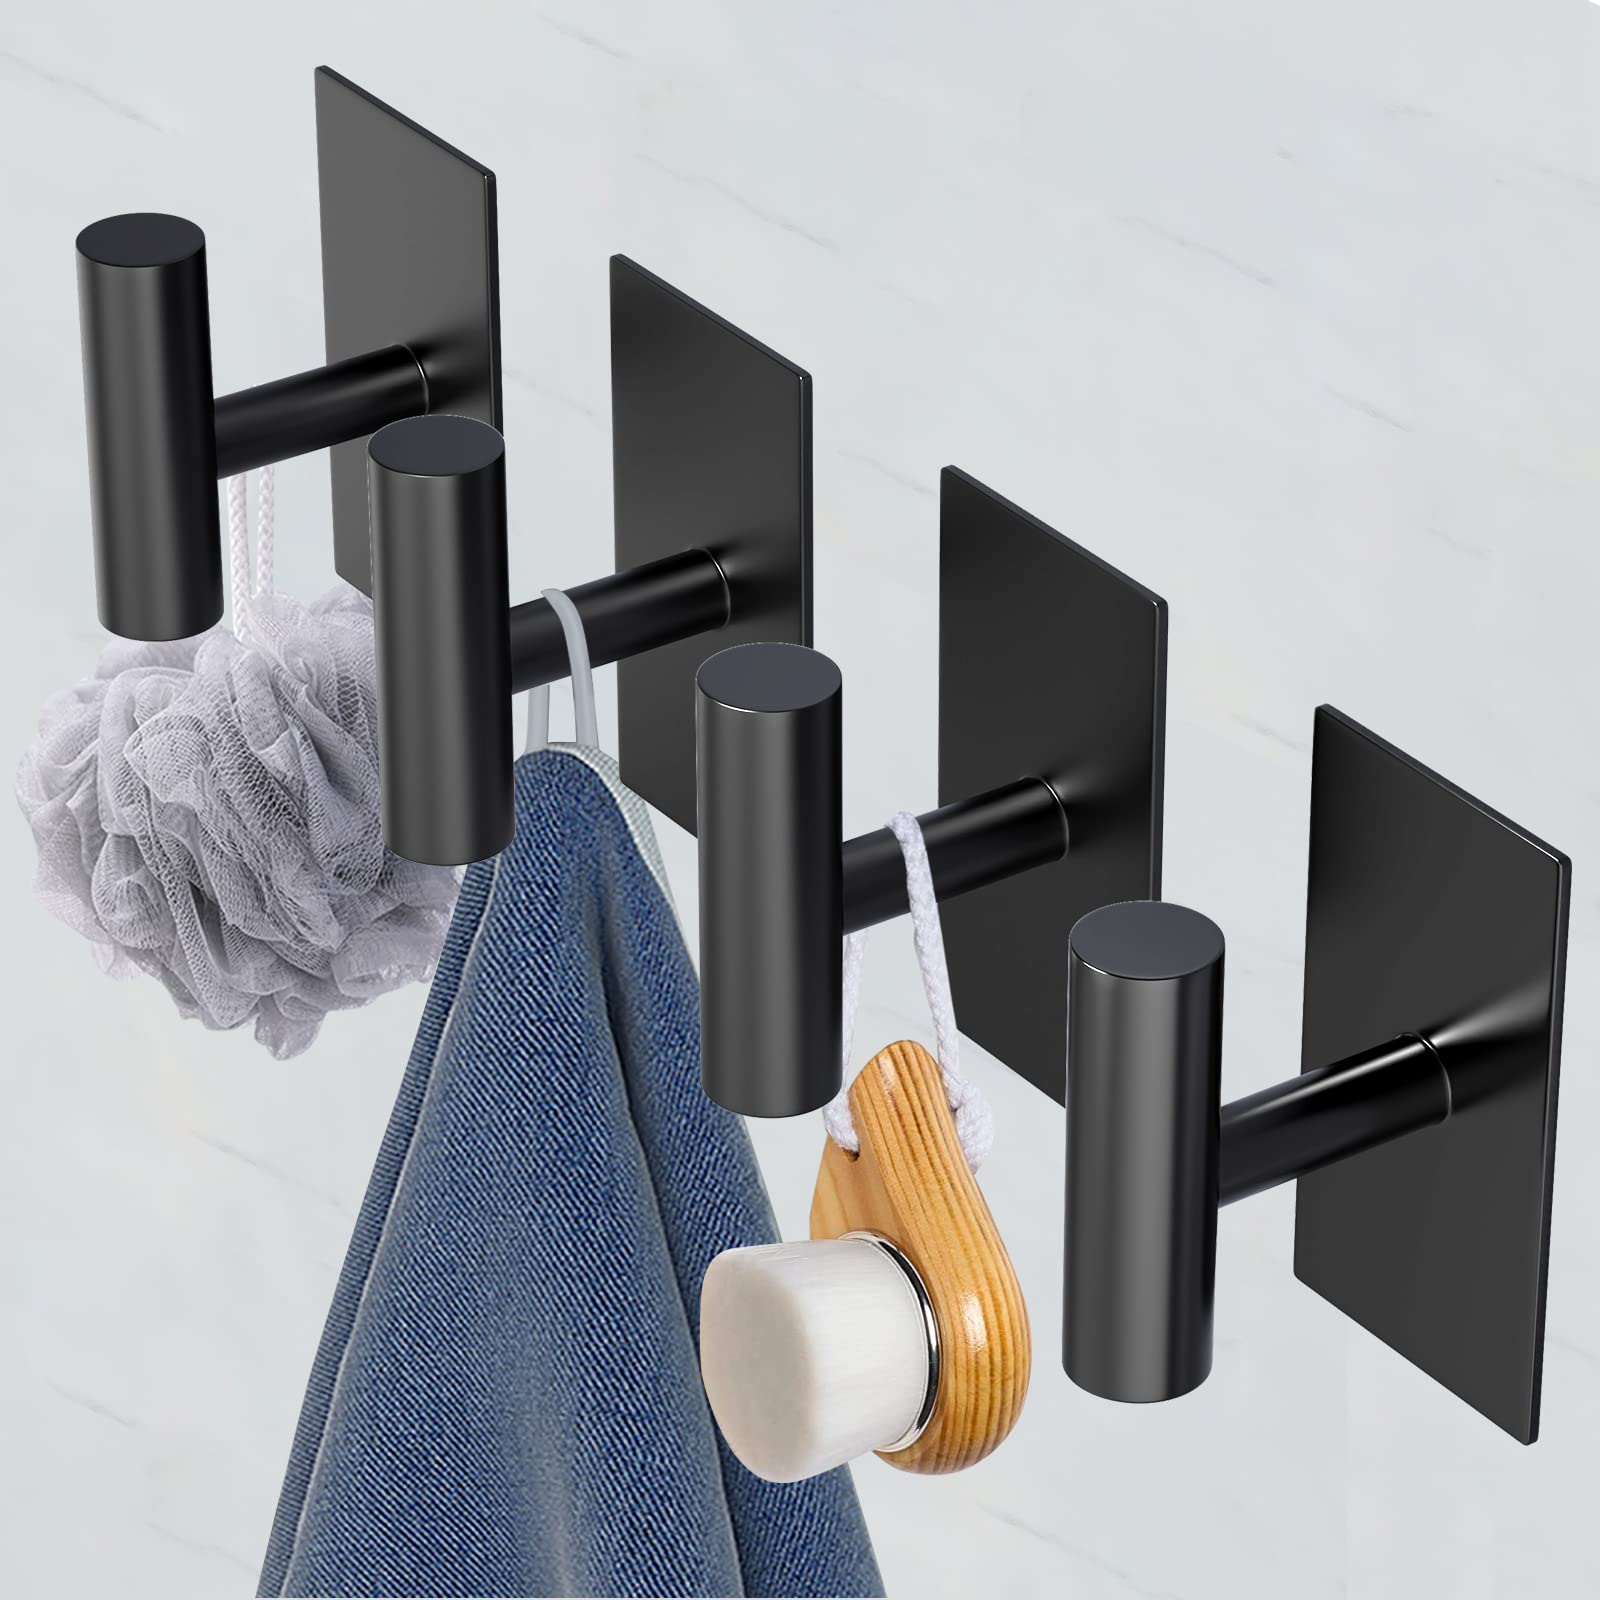 VAEHOLD Adhesive Hooks, Heavy Duty Wall Towel Hooks Stainless Steel Door Hooks for Hanging Coat, Hat, Towel, Robe, Key, Clothes, Closet Hook Wall Mount for Kitchen, Bathroom (Black)